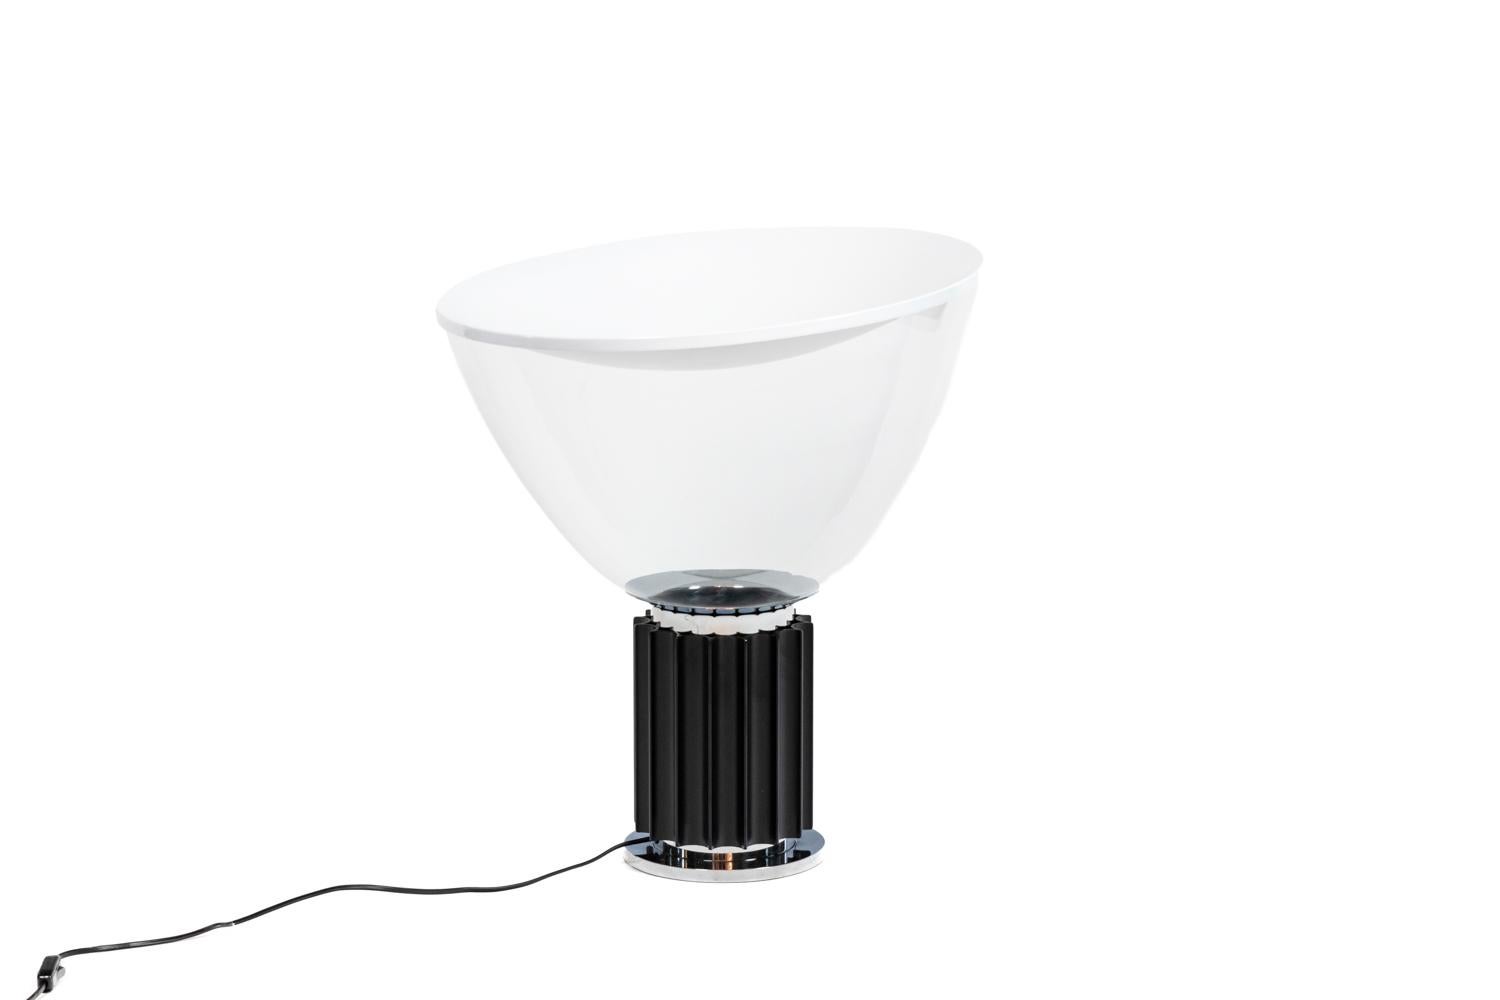 Achille & Pier Castiglioni, attributed to. 
Flos, edited by.

Lamp, “Taccia” model. Striped black base and white and transparent halo.

Italian work realized in the 1980s.